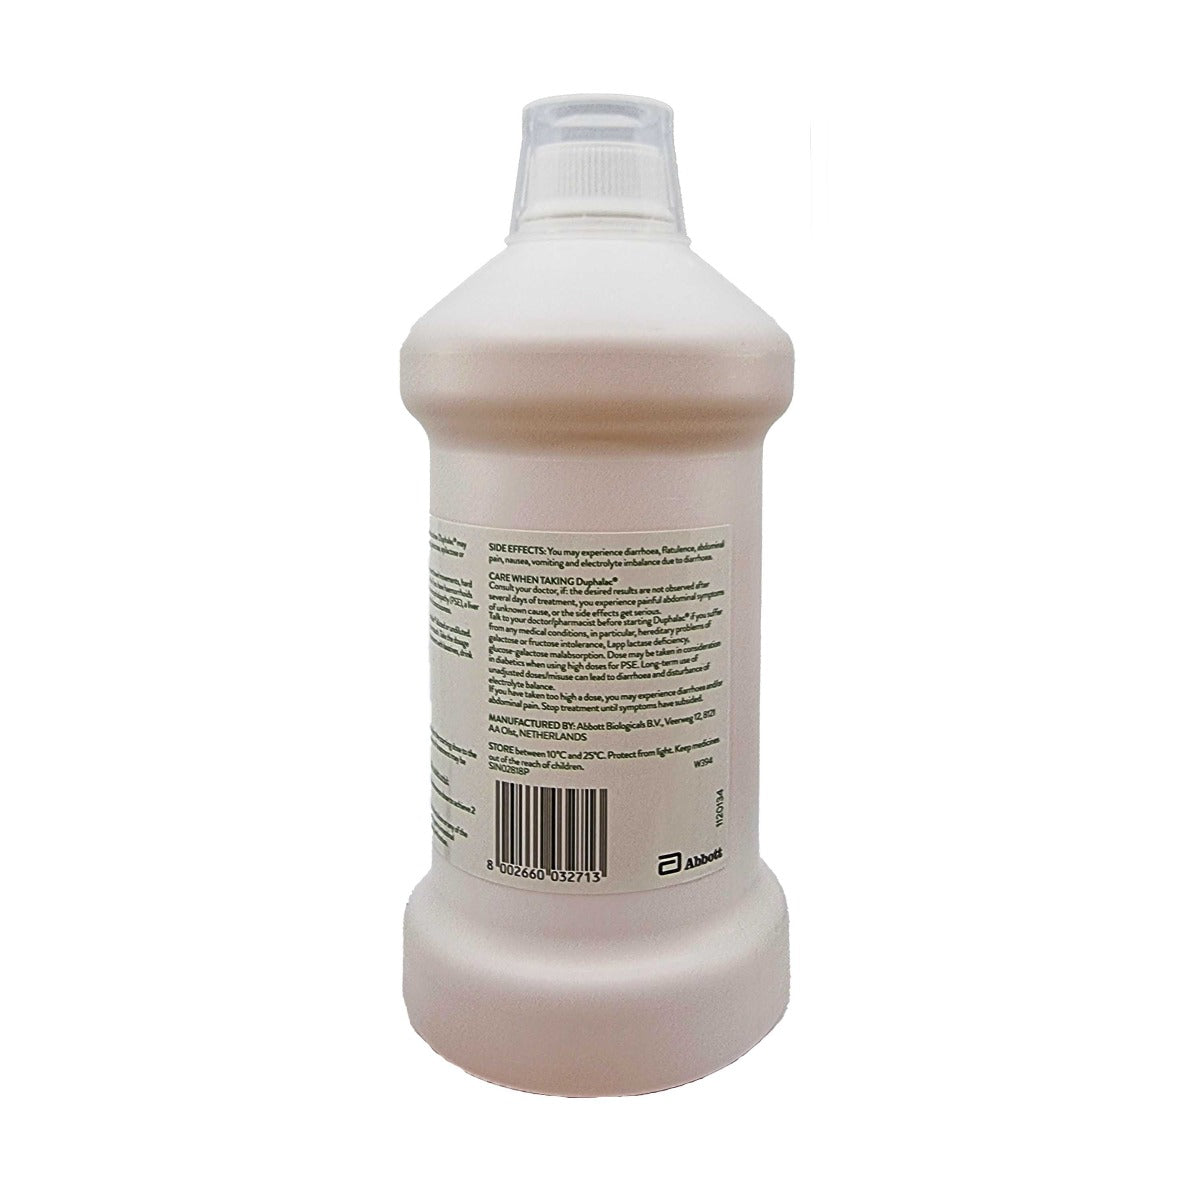 Duphalac Lactulose Oral Solution 1000ml Back